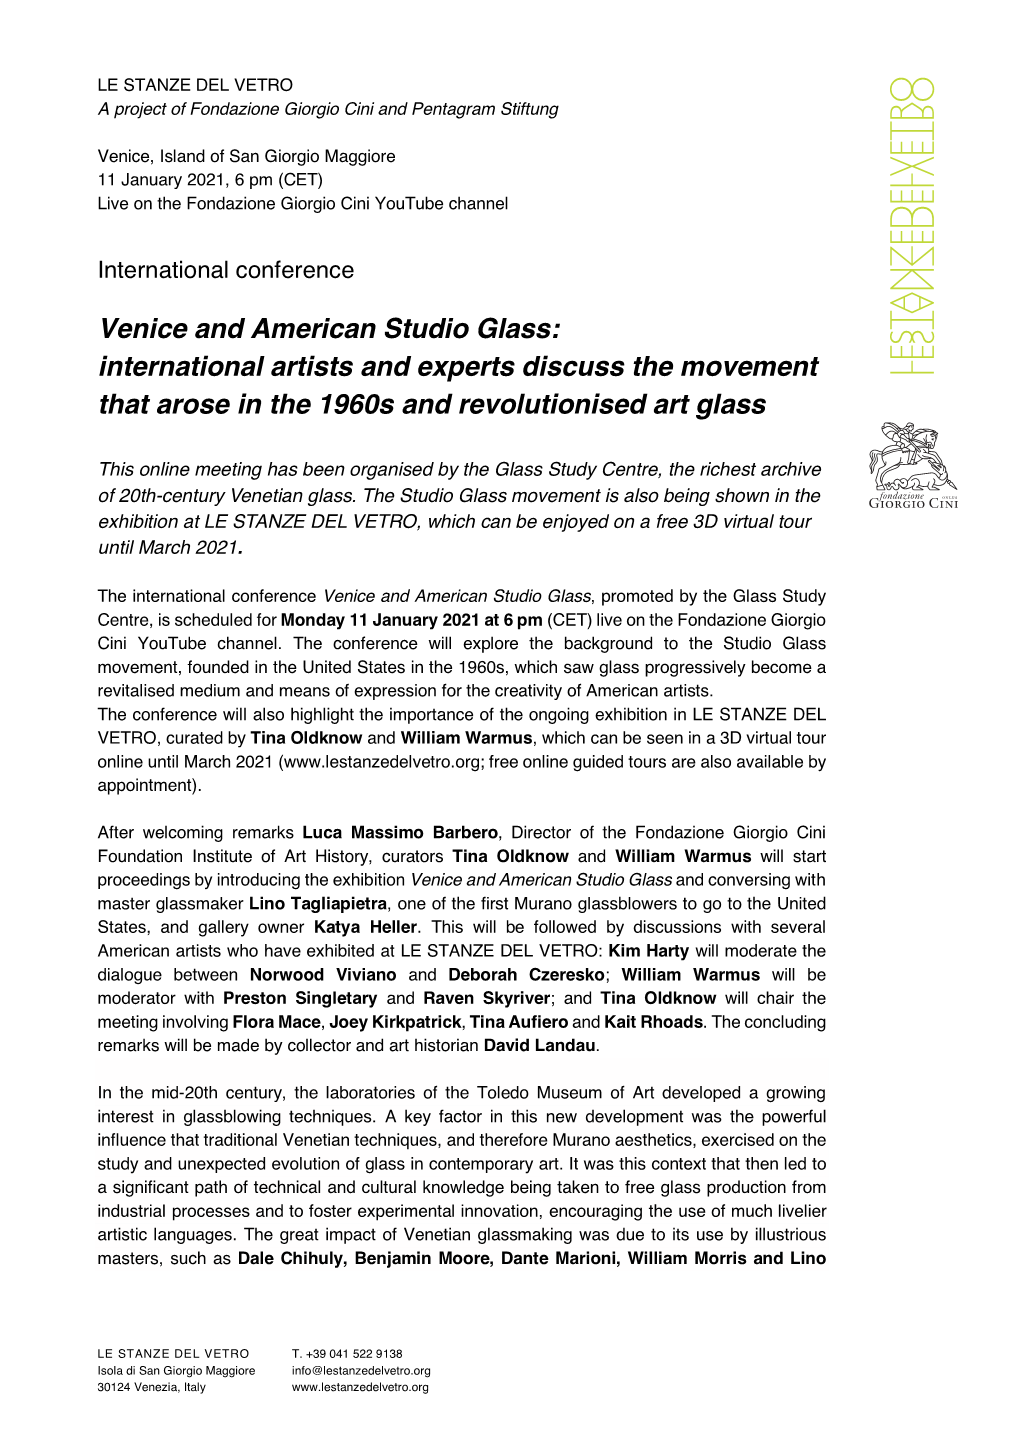 Venice and American Studio Glass: International Artists and Experts Discuss the Movement That Arose in the 1960S and Revolutionised Art Glass